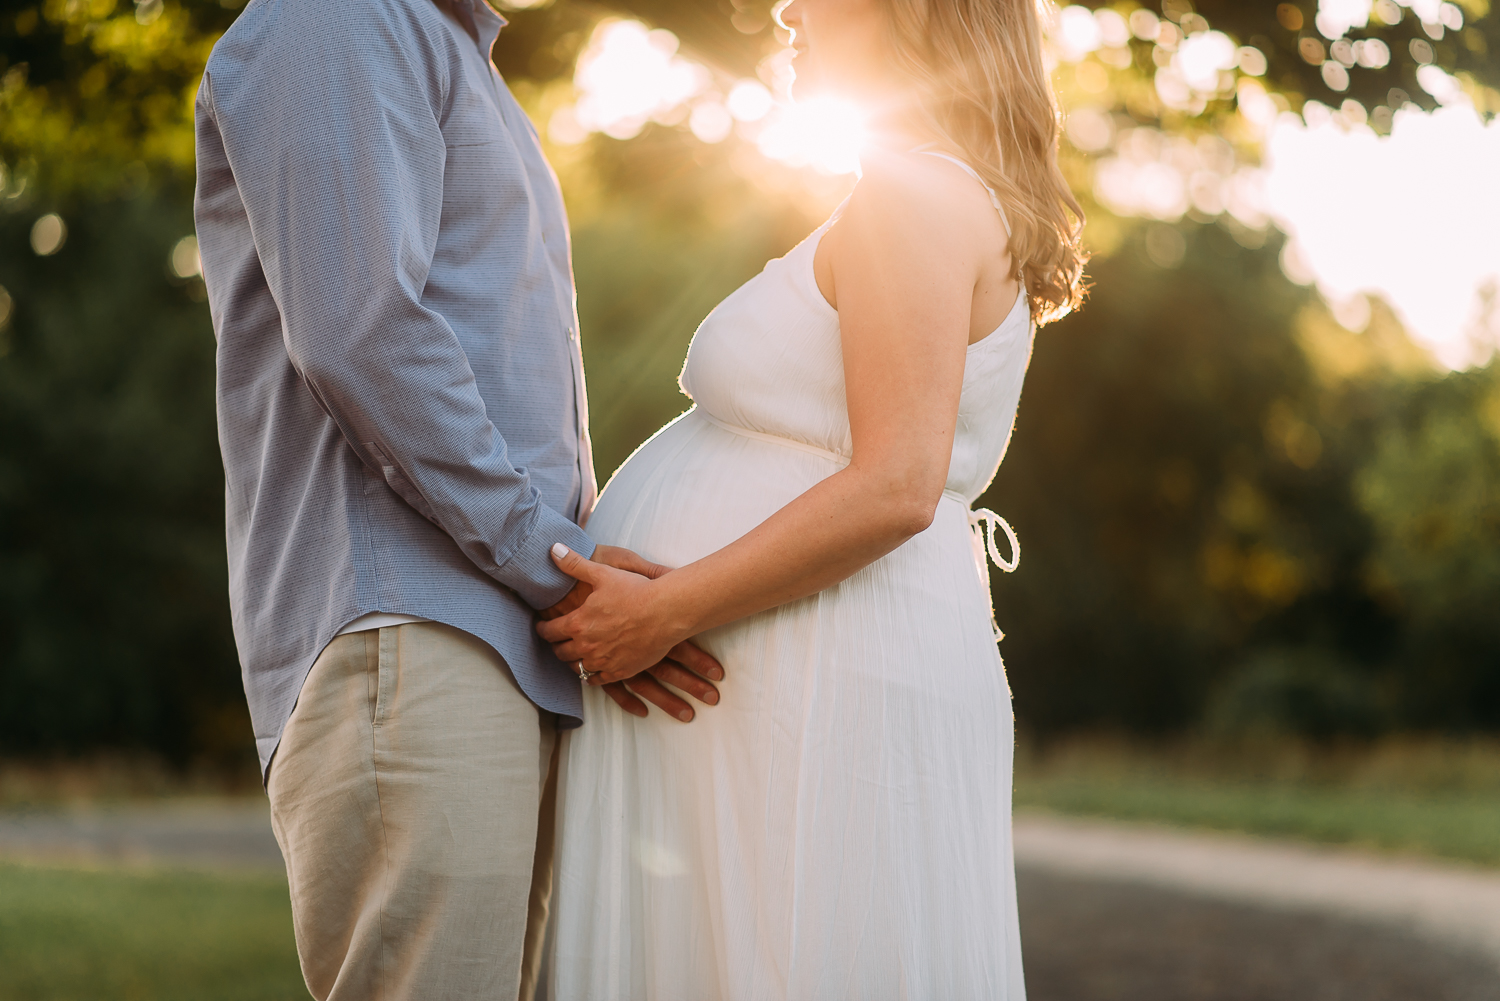 maternity photography pregnant woman with husband bump sunset Baltimore Photographer